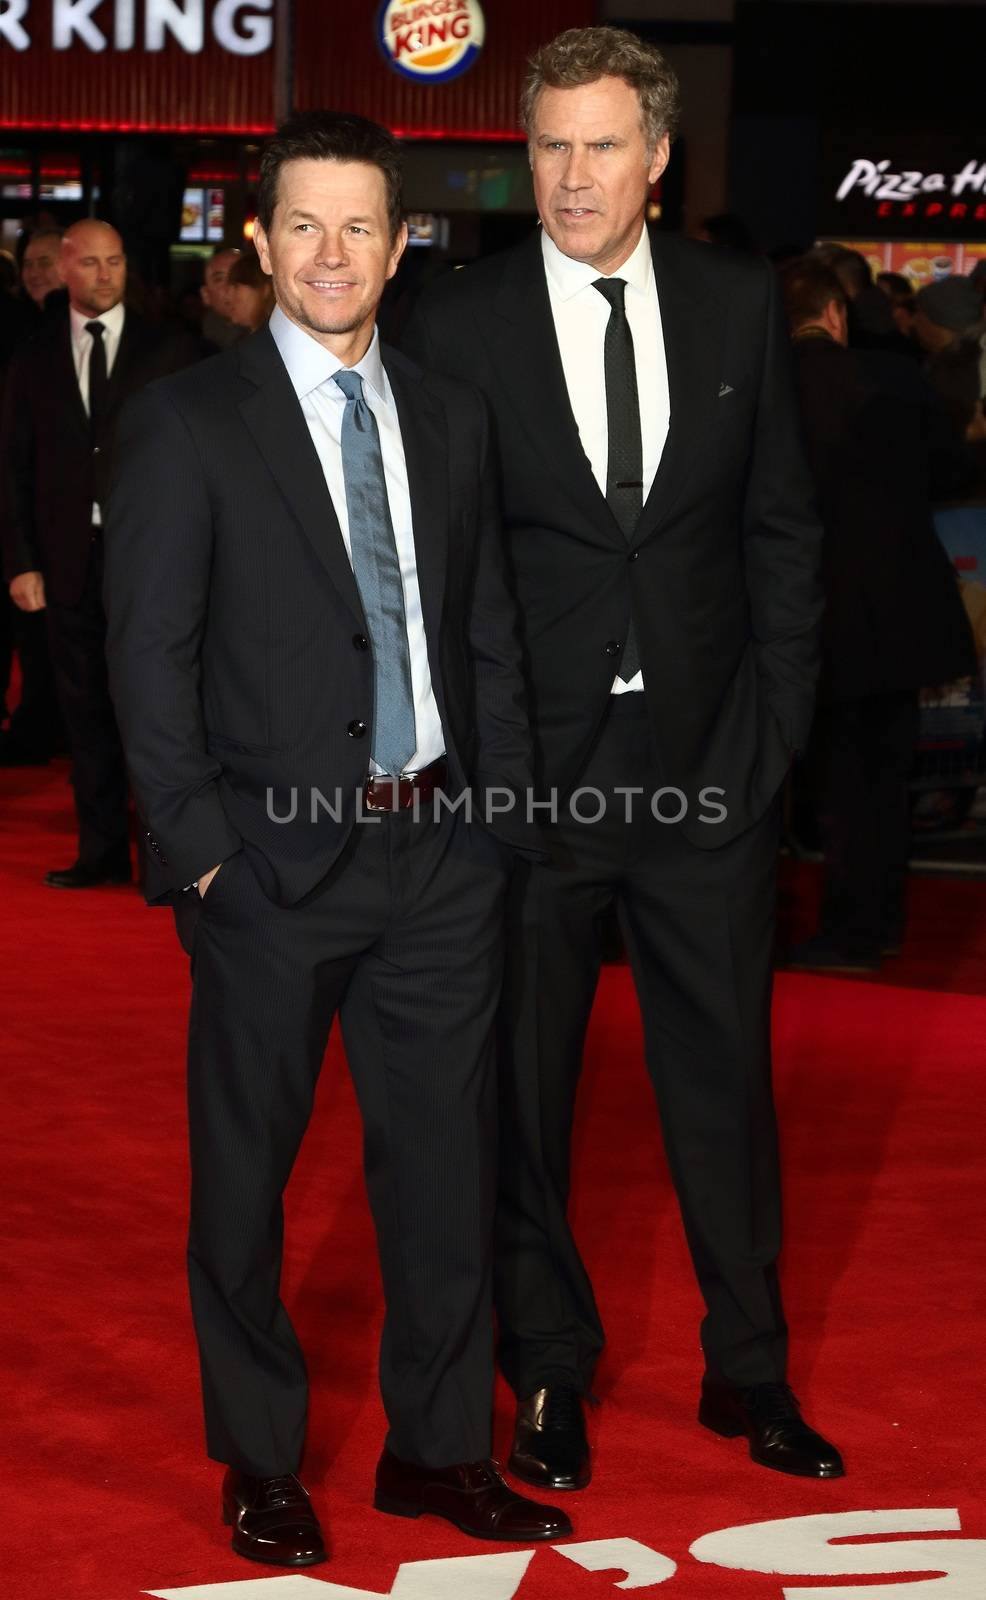 UK, London: Mark Wahlberg and Will Ferrell graced the red carpet in London for the UK Premiere of their new film Daddy's Home on December 9, 2015.